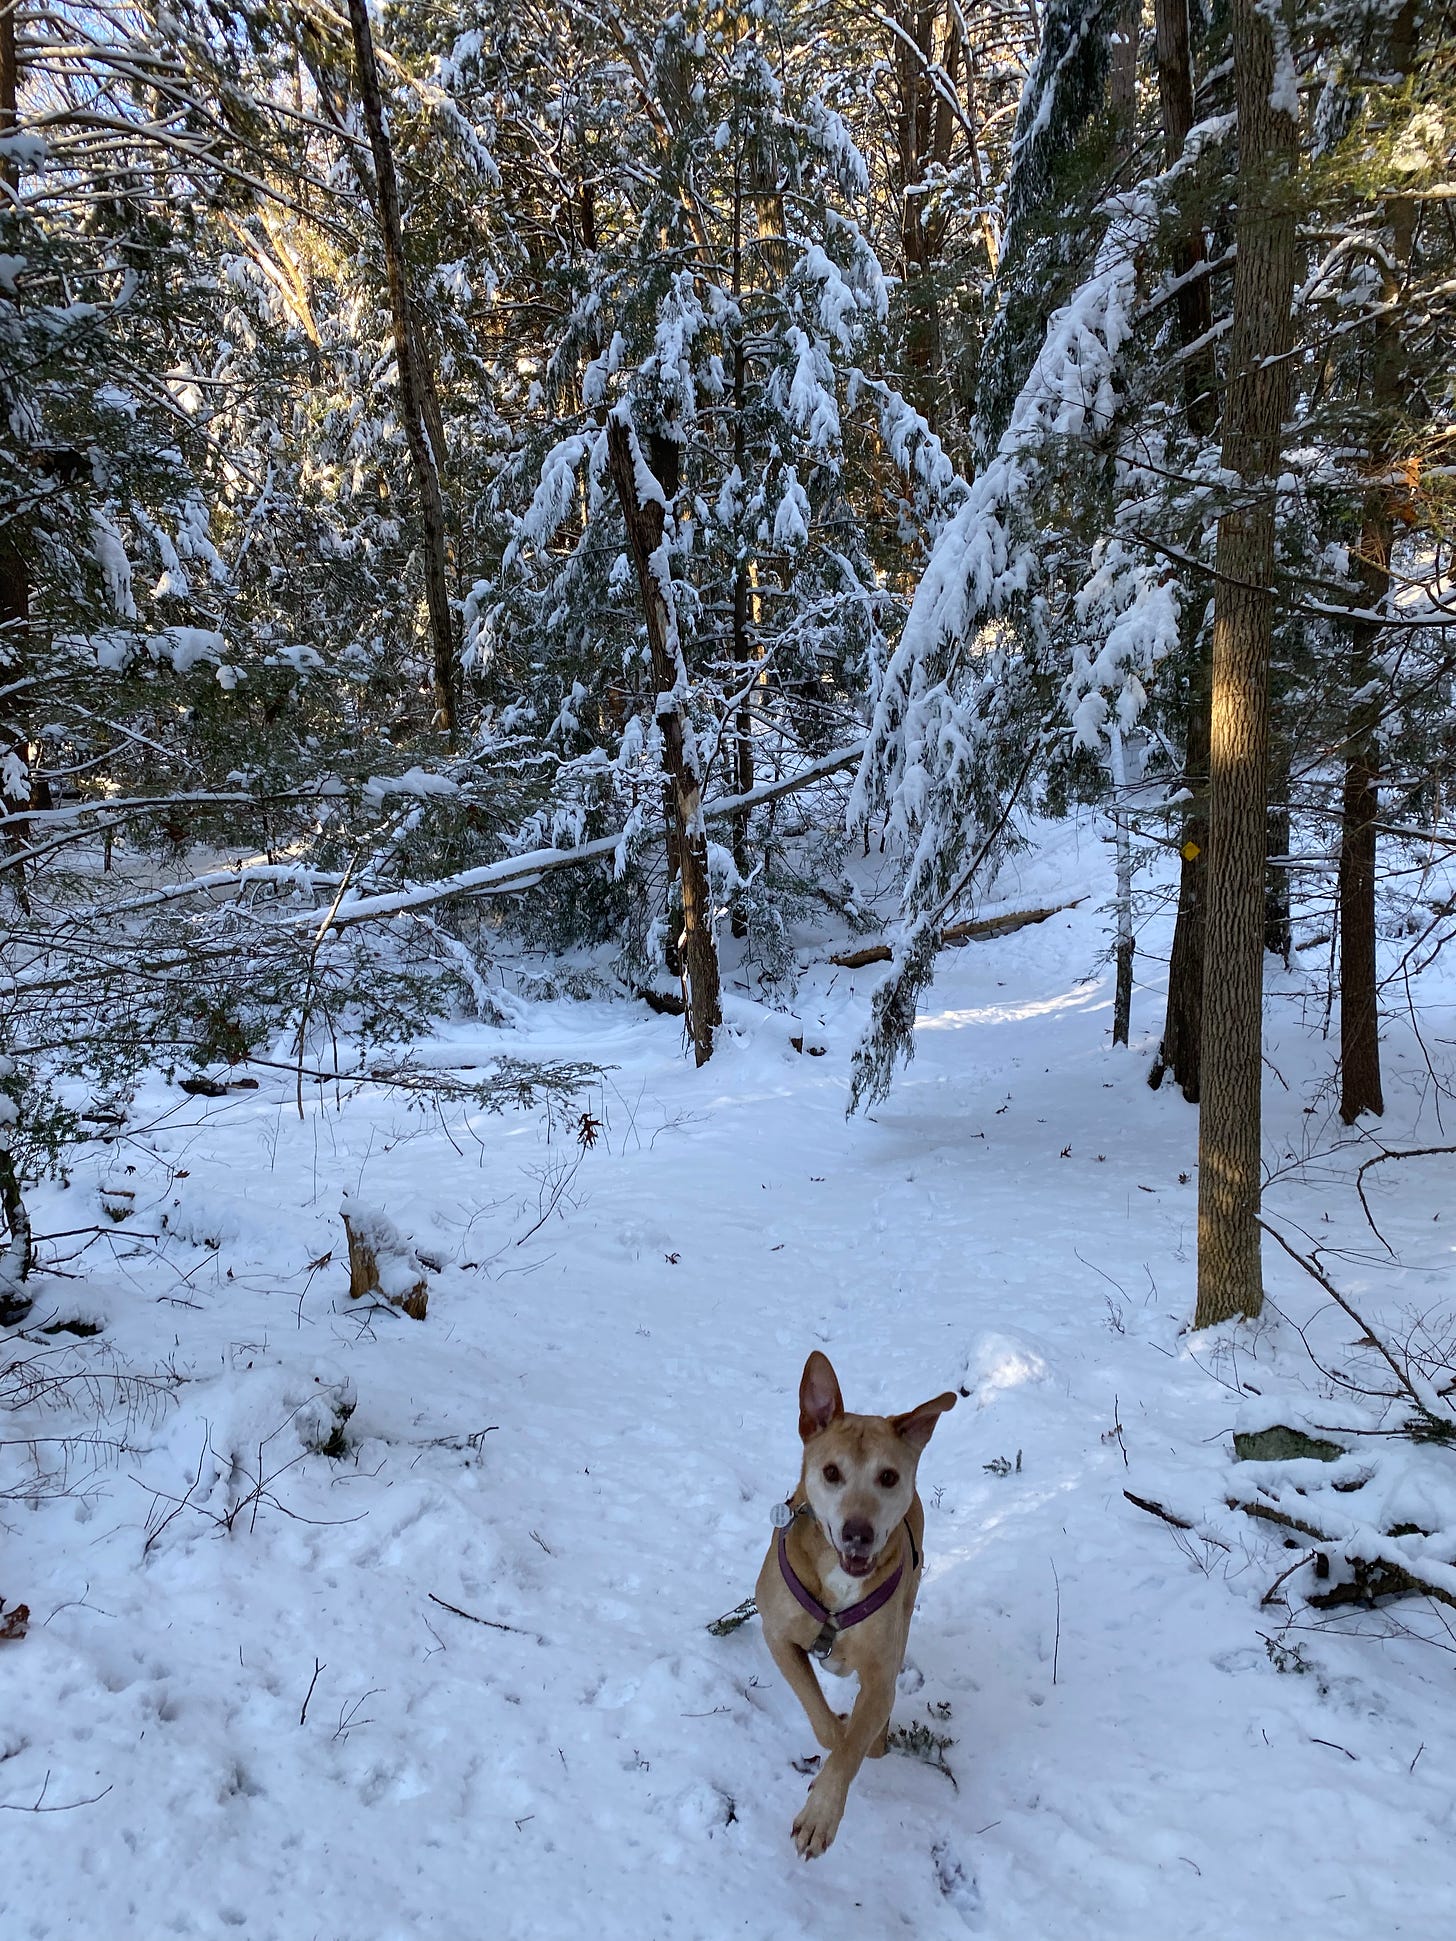 Nessa, mid-leap in the snowy woods: ears sticking straight up and legs extended.